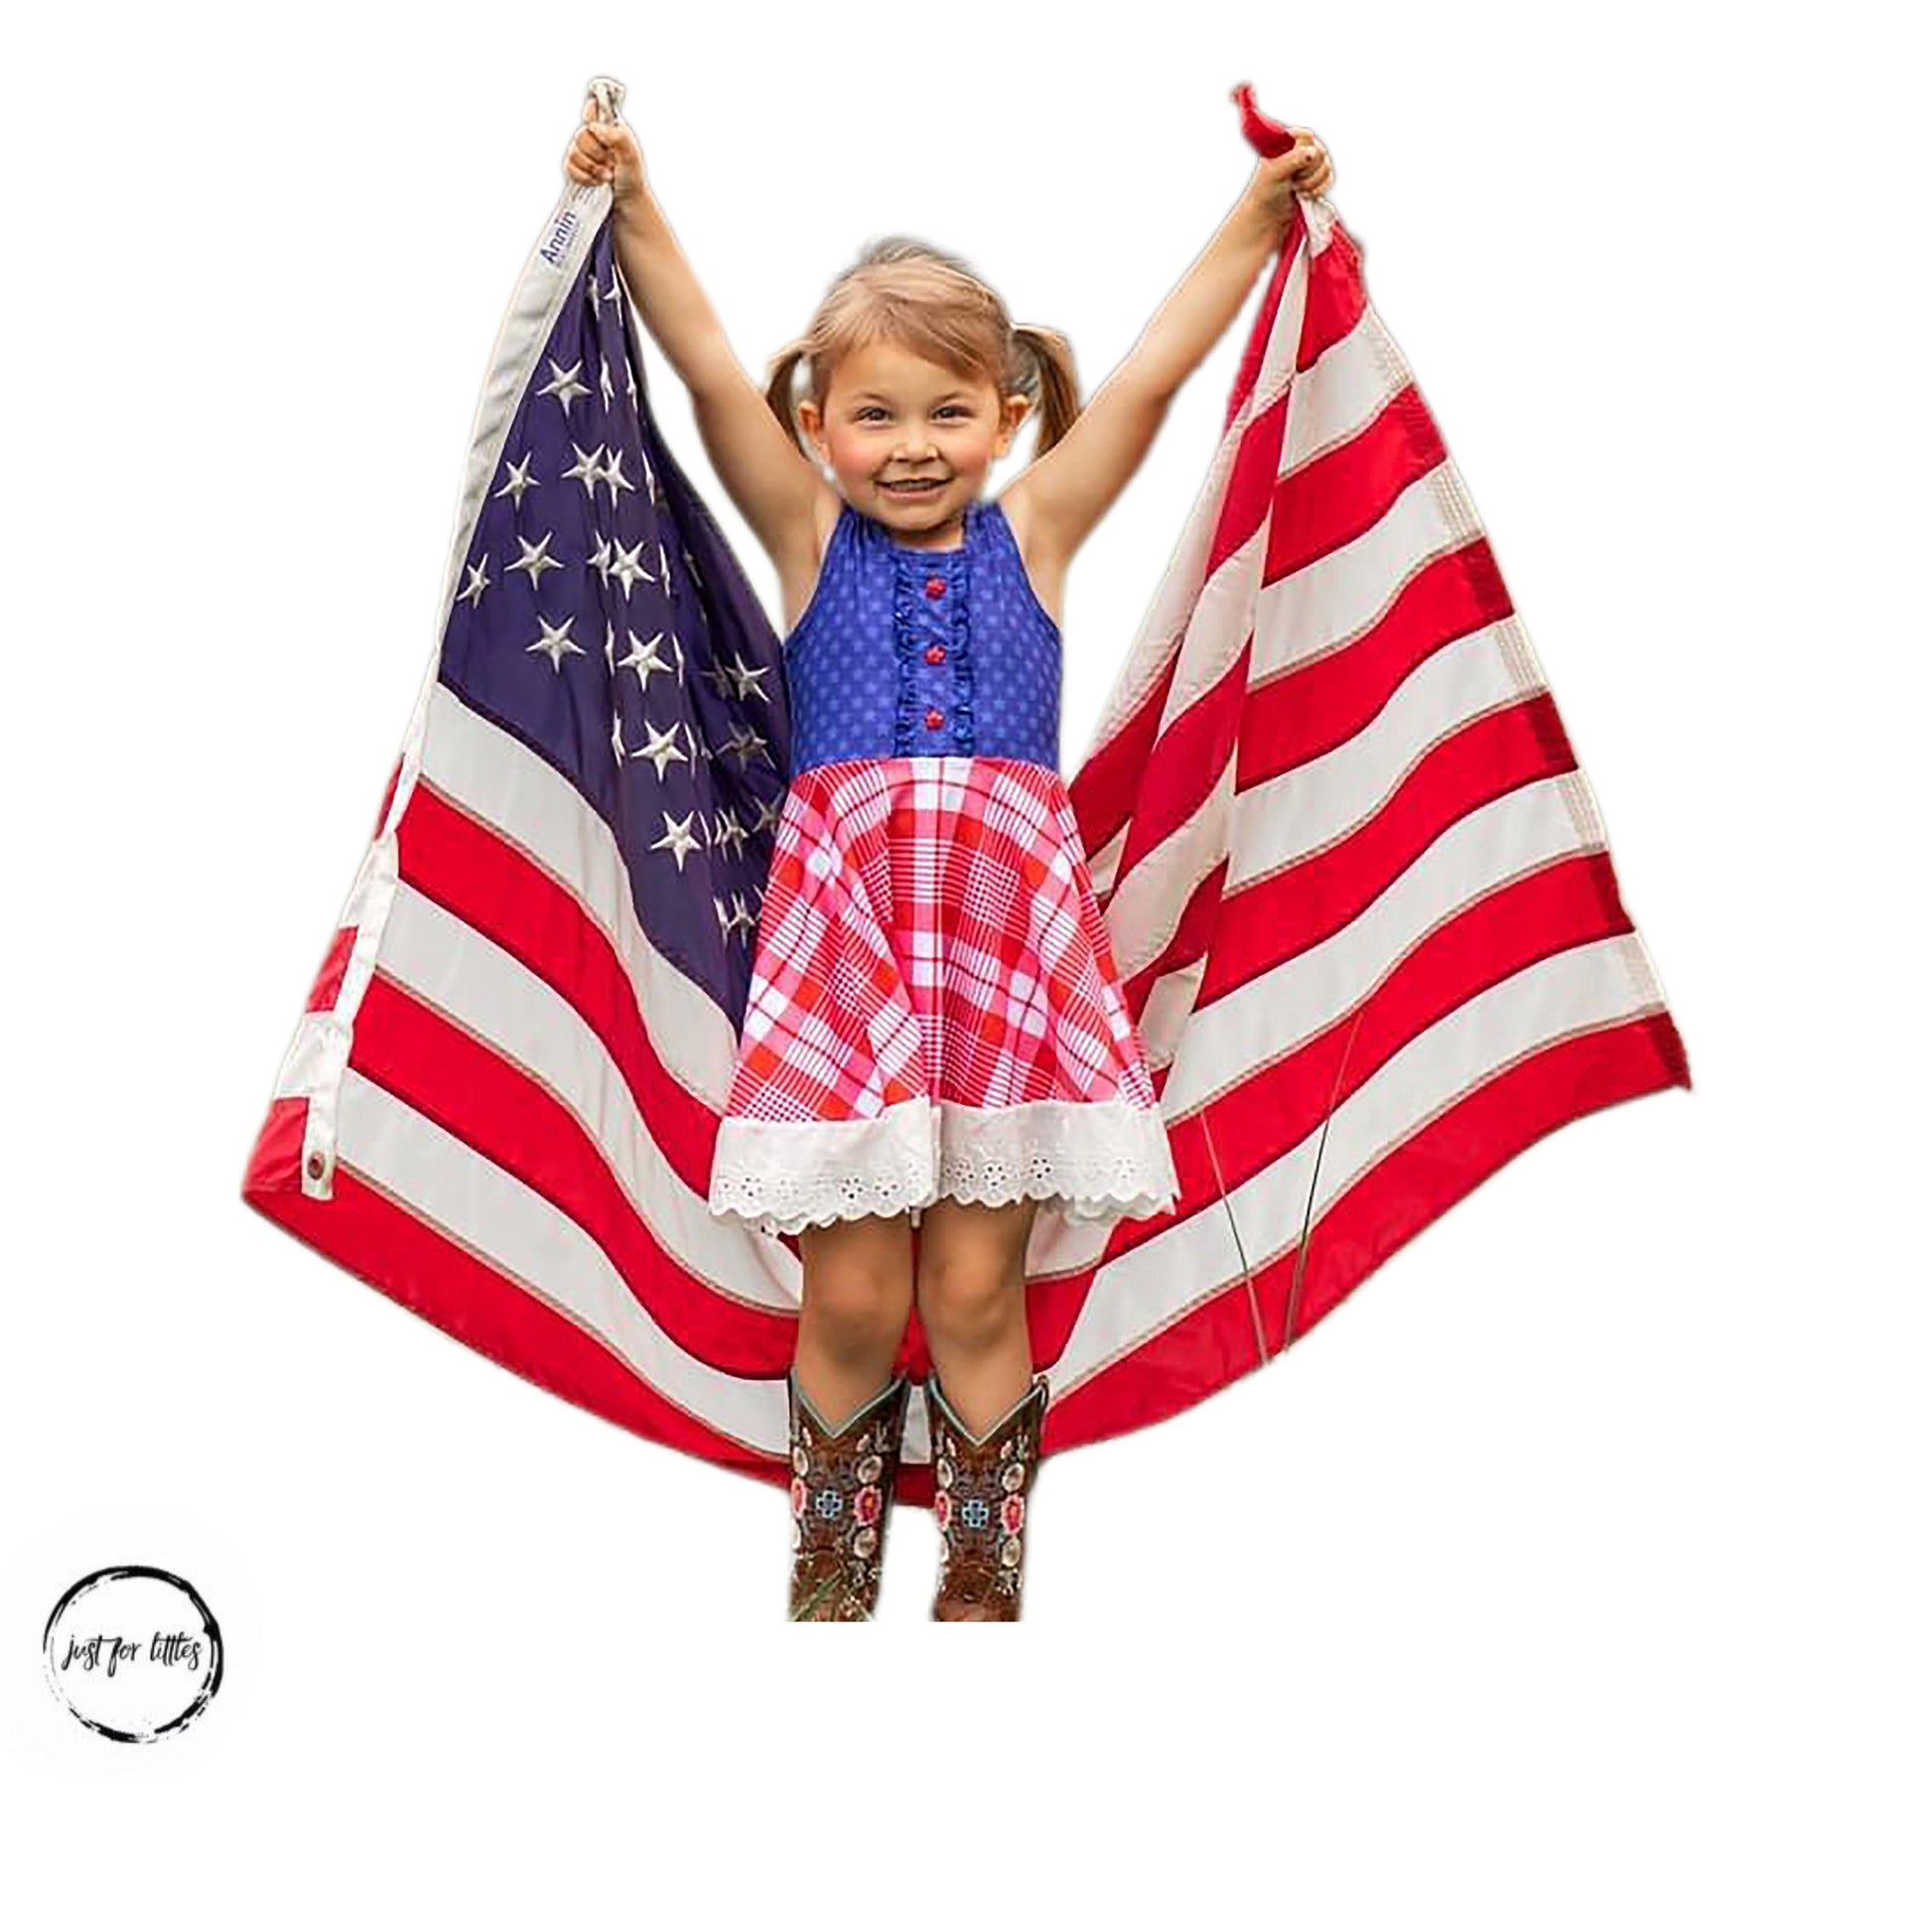 Sweet Country Patriotic Twirl Dress by Just For Littles